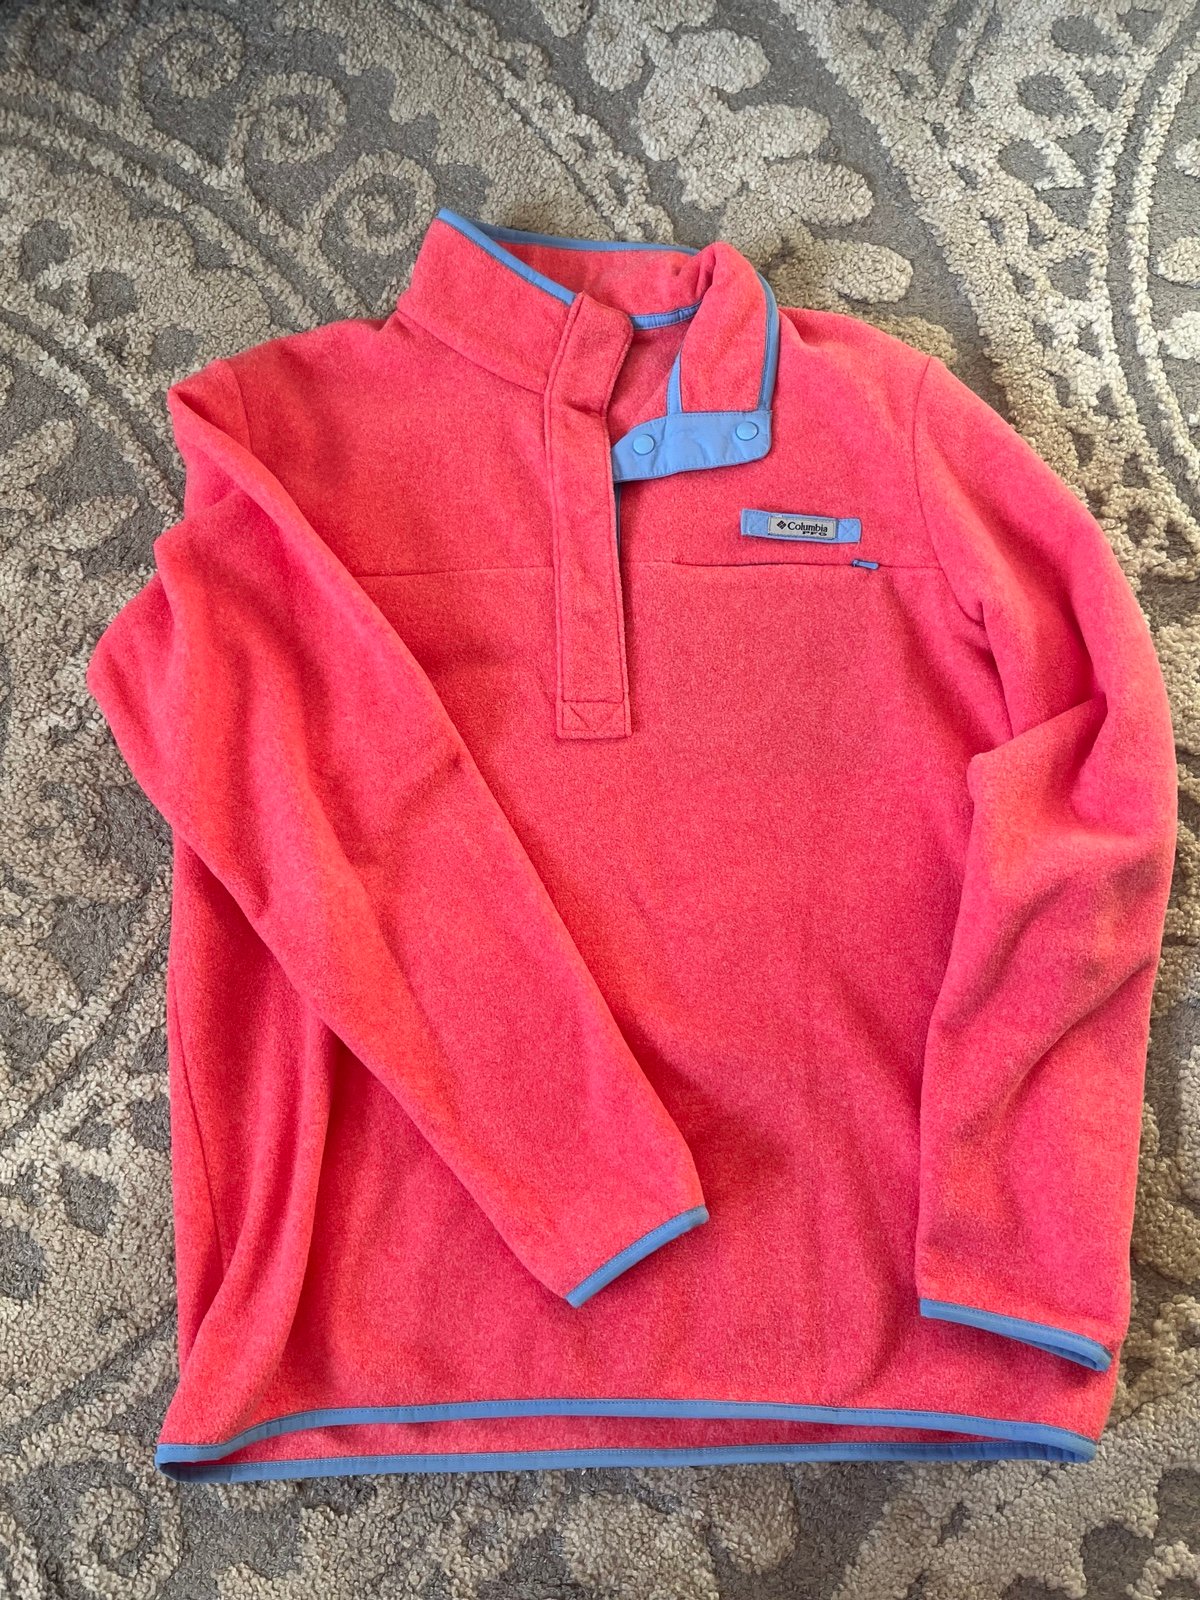 save up to 70% Columbia Fleece Button Pullover Size XL 